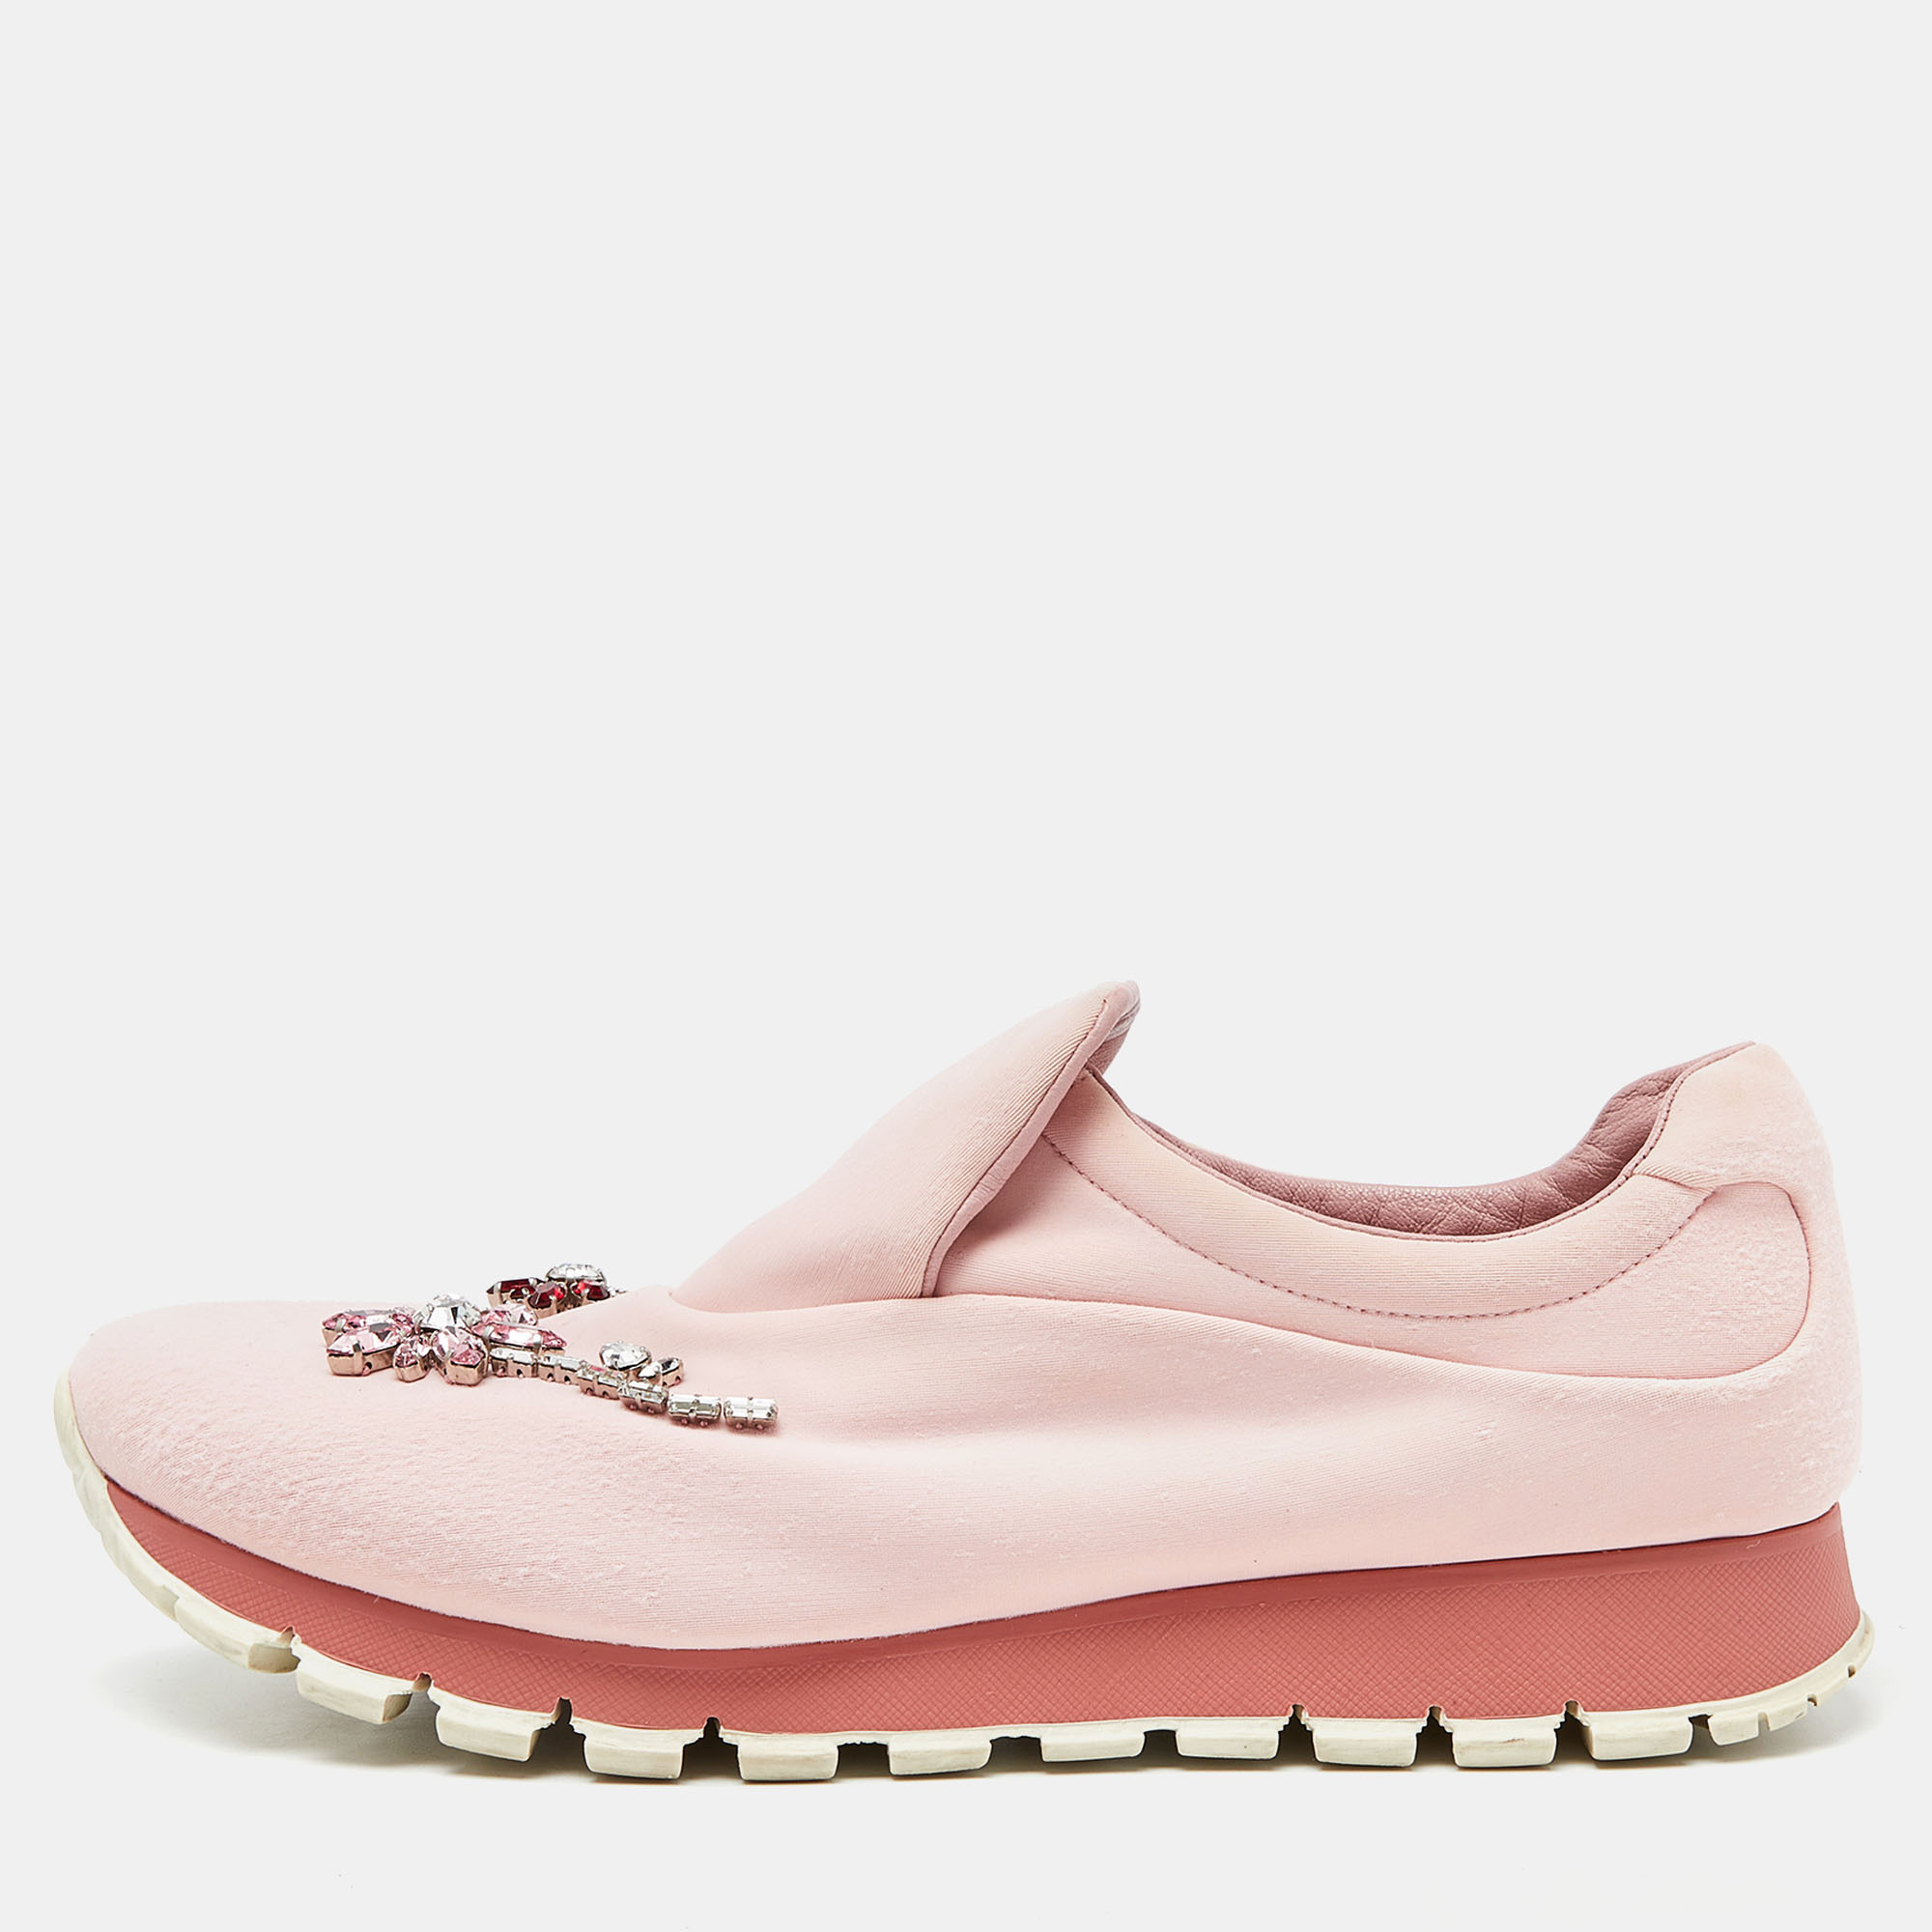 Elevate your footwear game with these Prada pink sneakers. Combining high end aesthetics and unmatched comfort these sneakers are a symbol of modern luxury and impeccable taste.